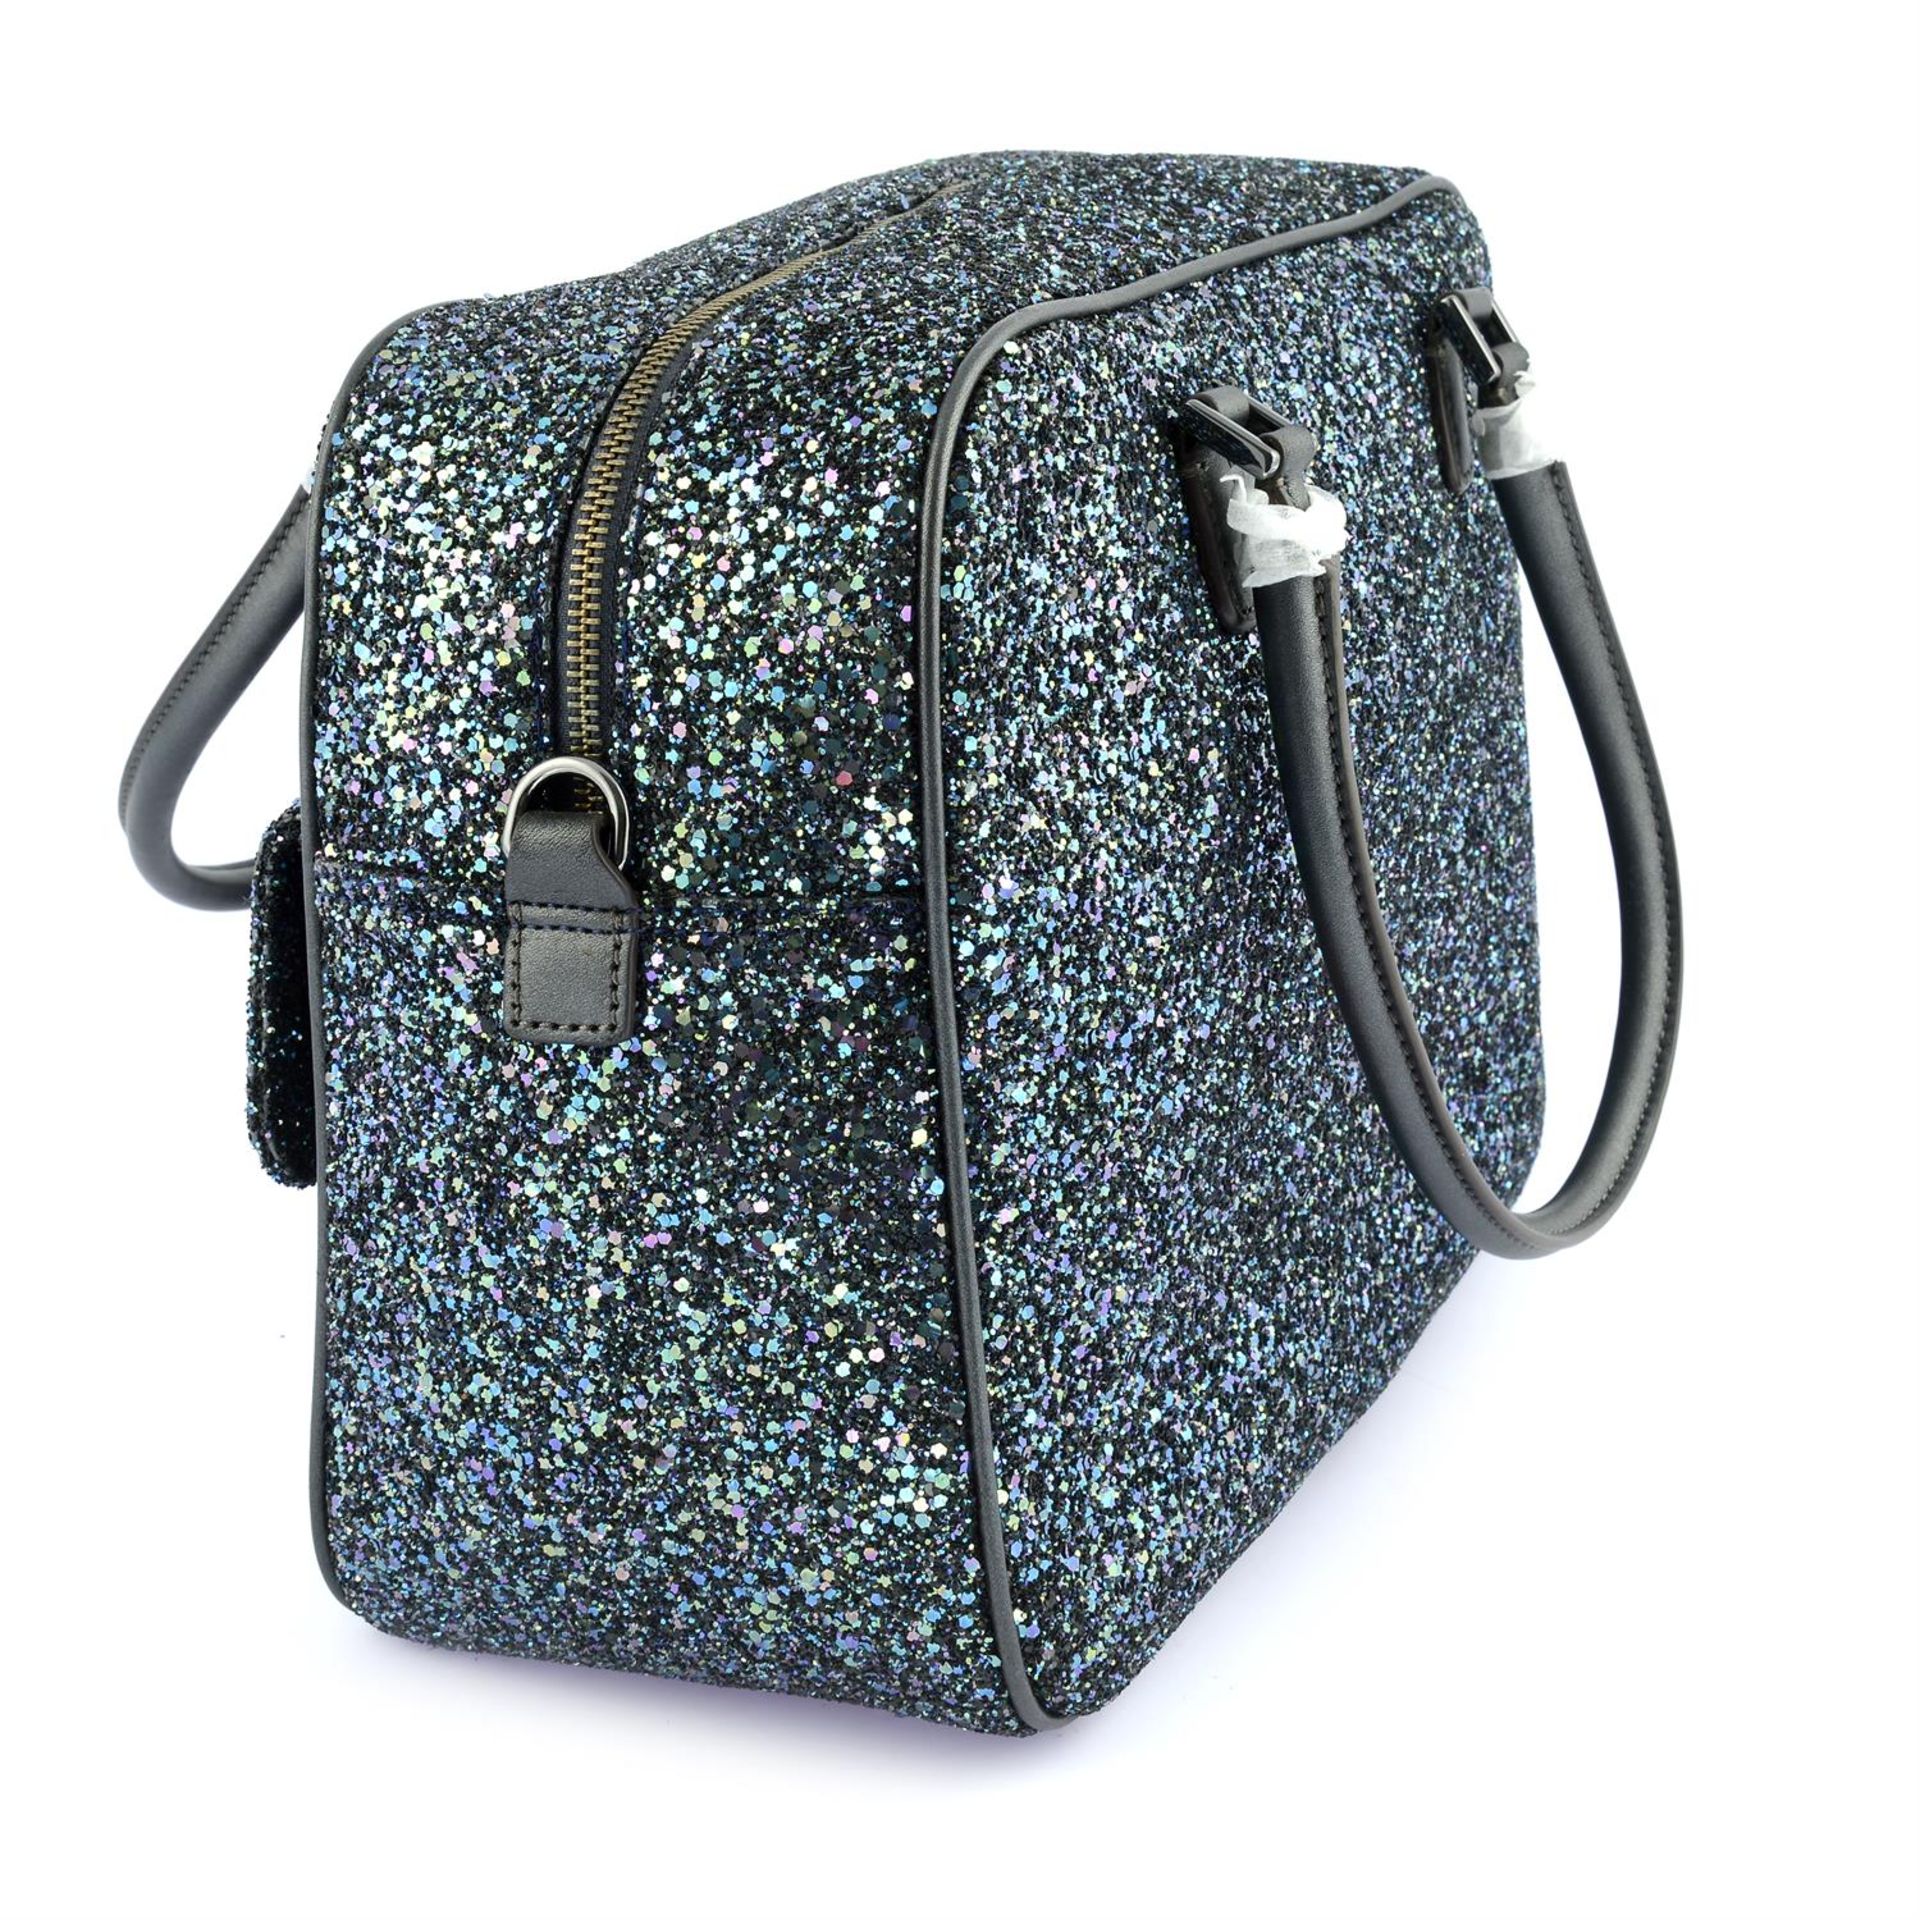 ANYA HINDMARCH -a glitter and black leather Boston bag. - Image 3 of 6